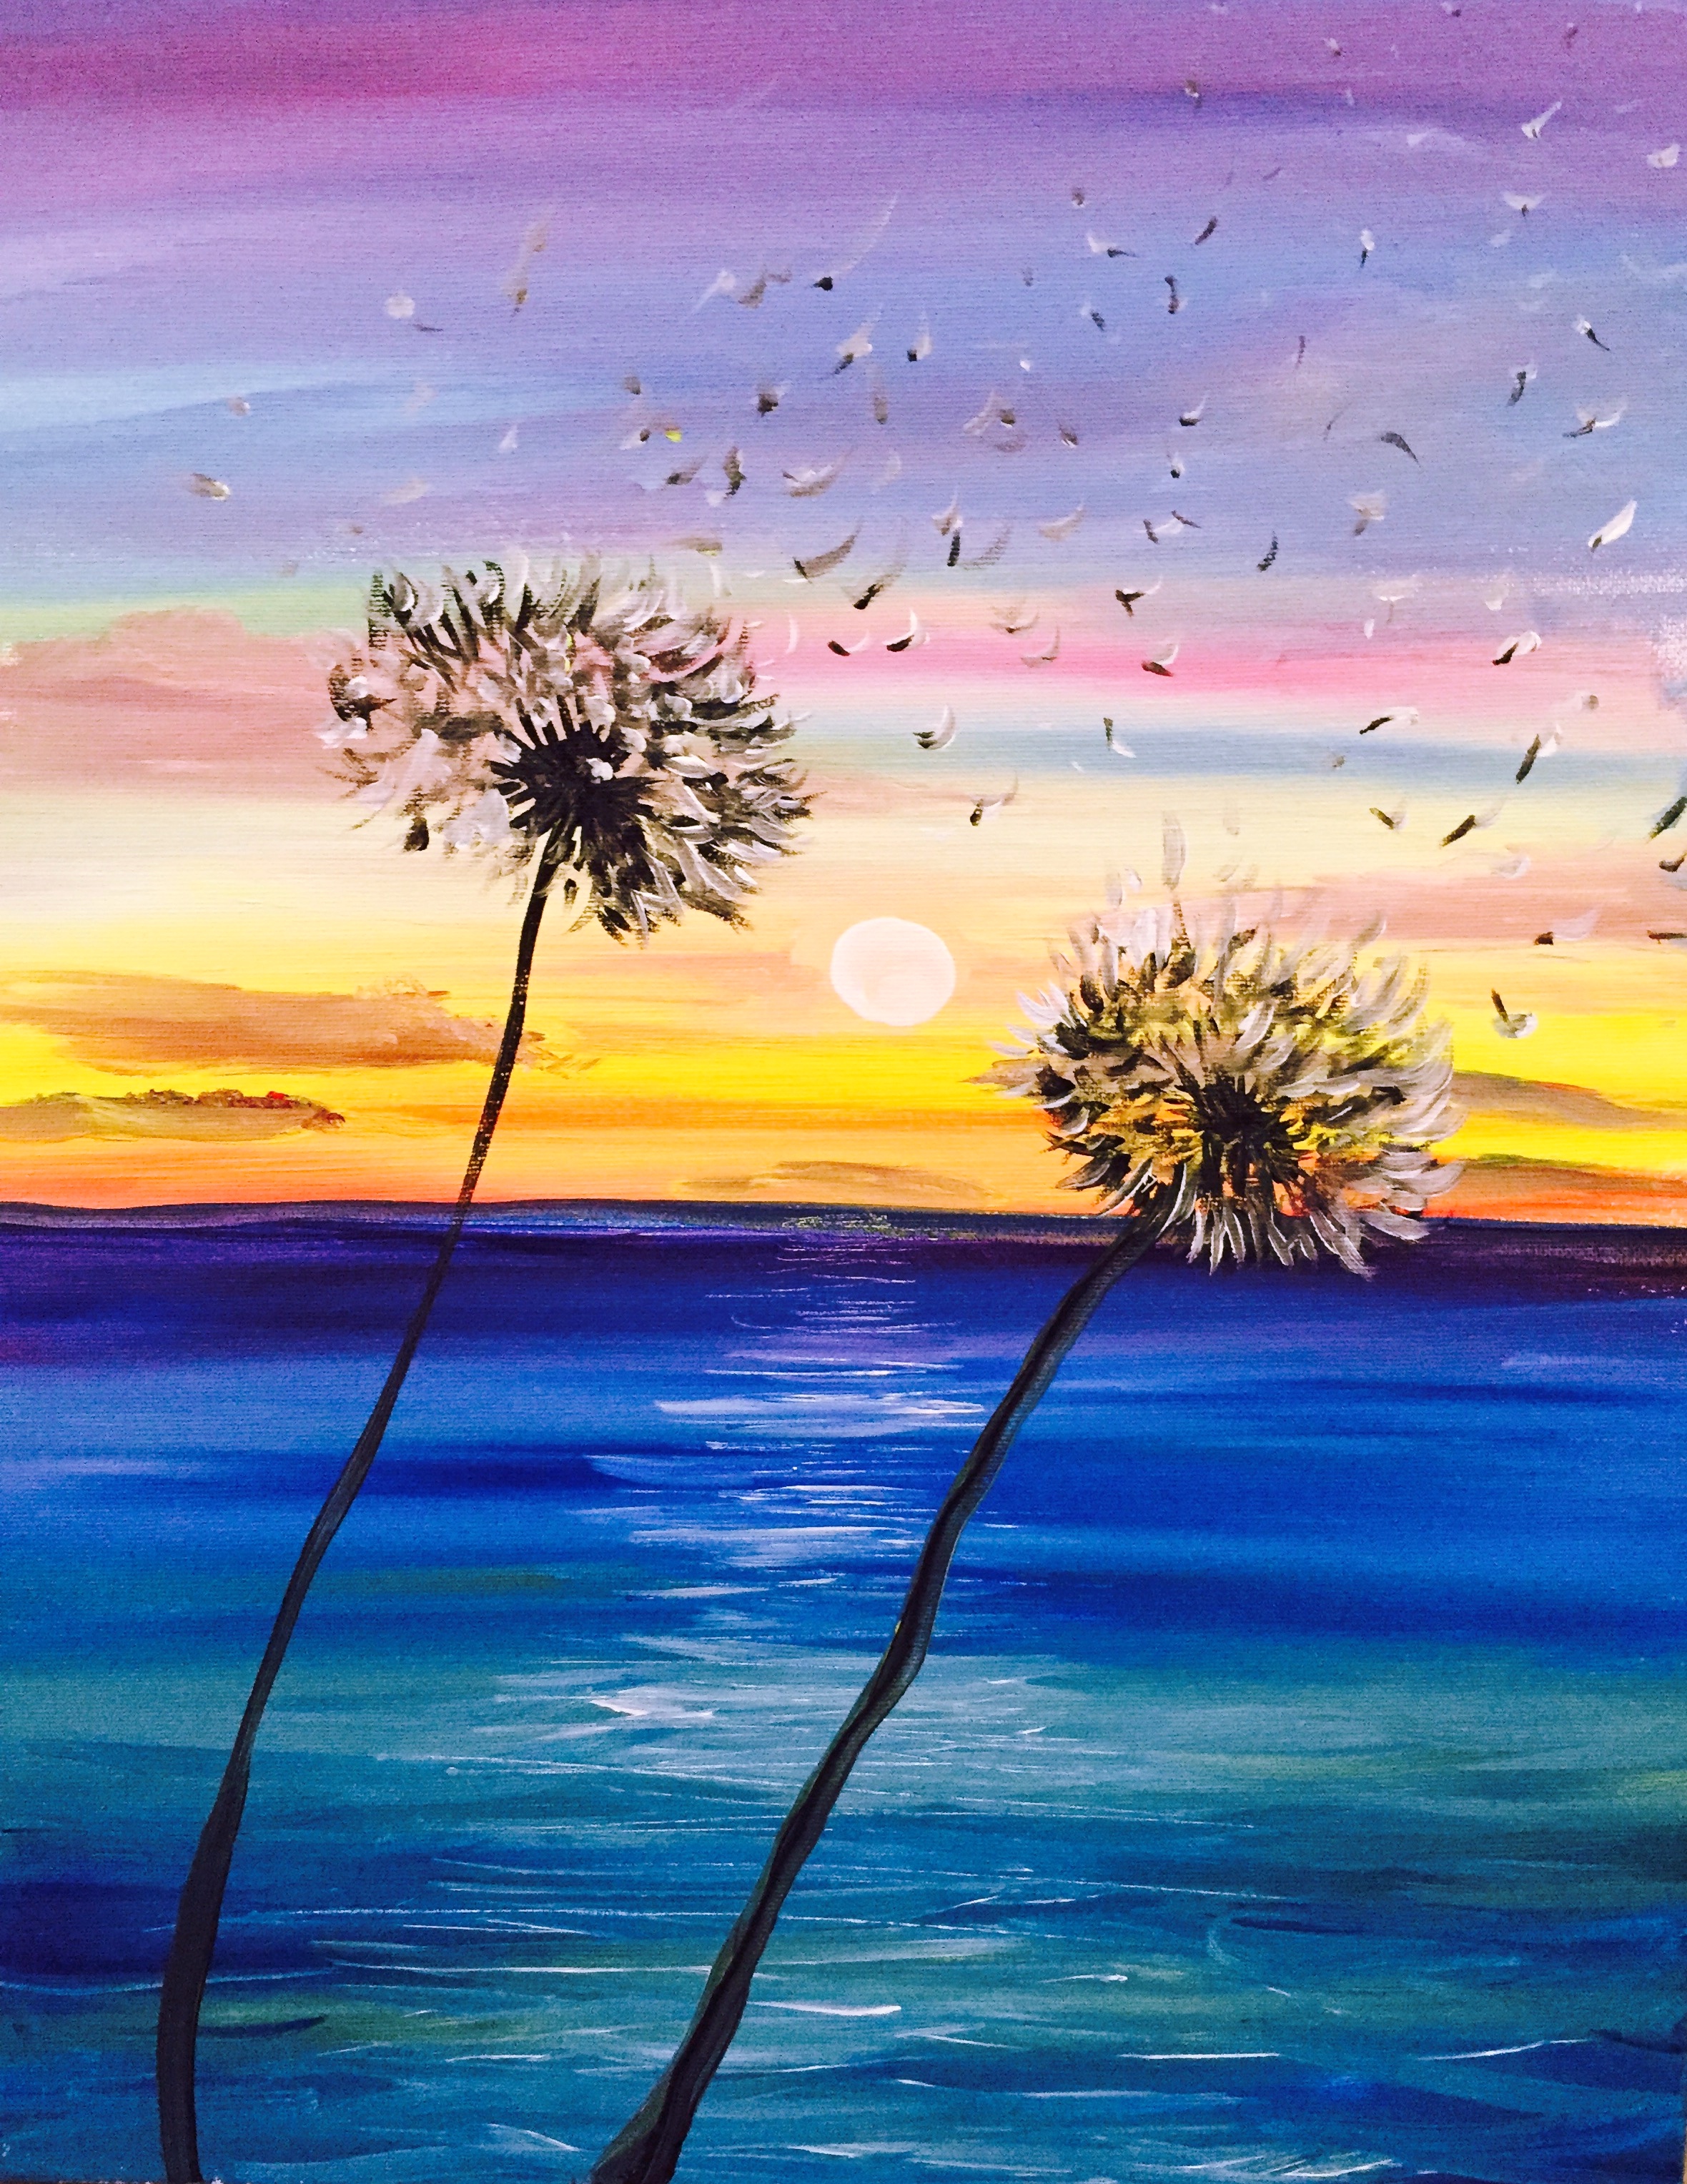 A Night Wish paint nite project by Yaymaker